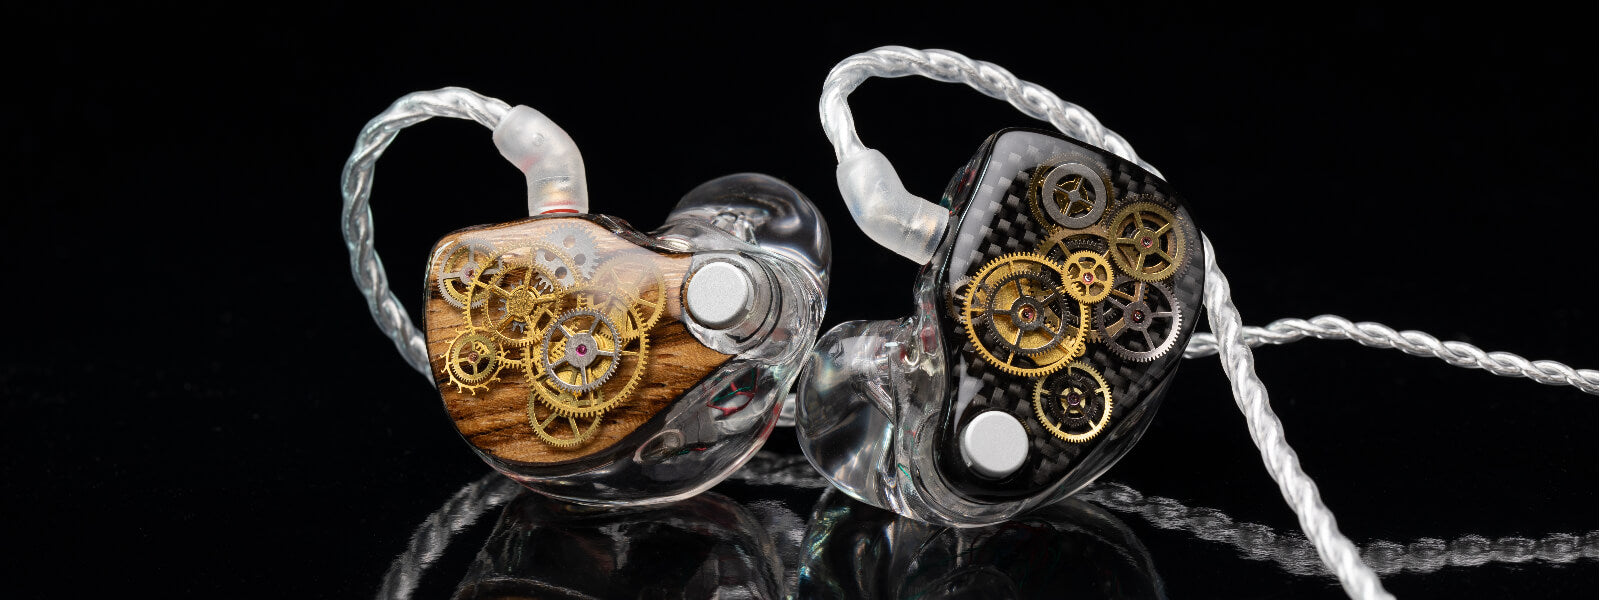 64 audio custom iem front view watch gears face plate with cables